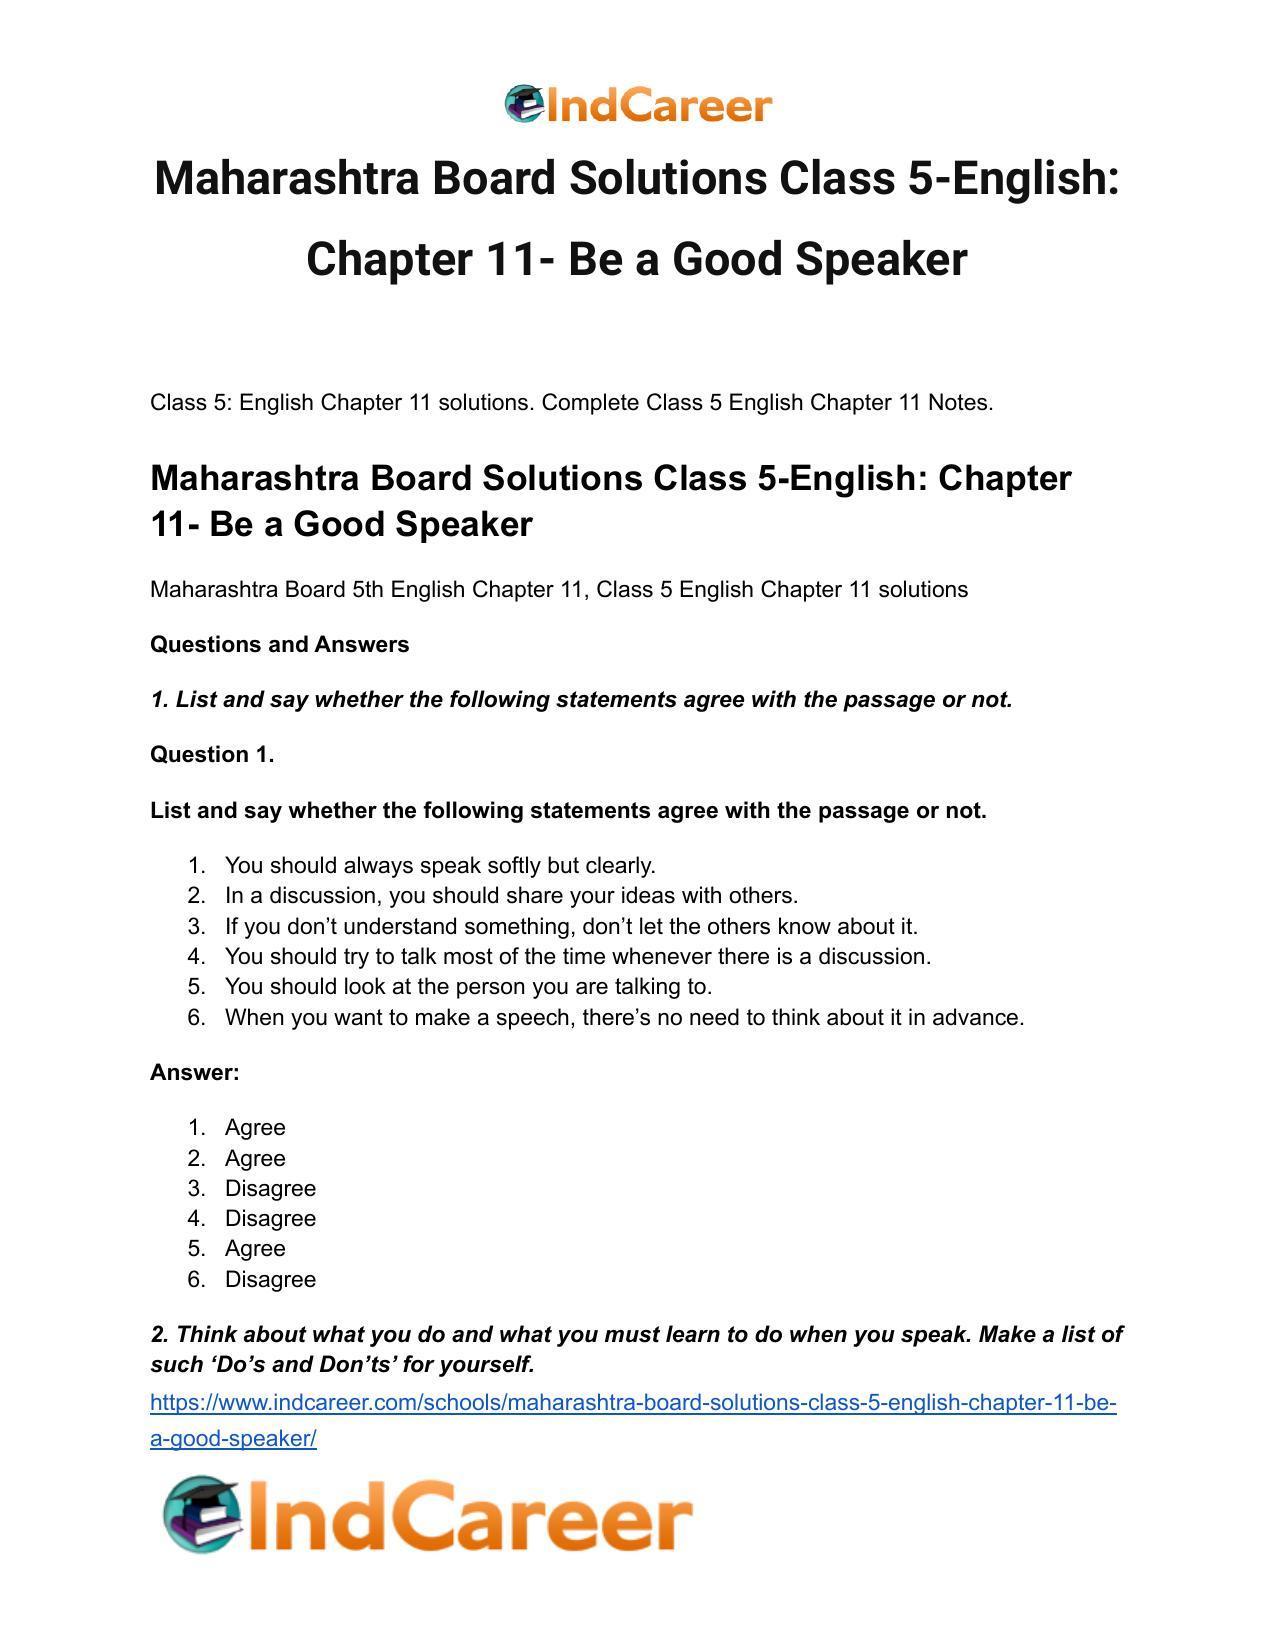 Maharashtra Board Solutions Class 5-English: Chapter 11- Be a Good Speaker - Page 2